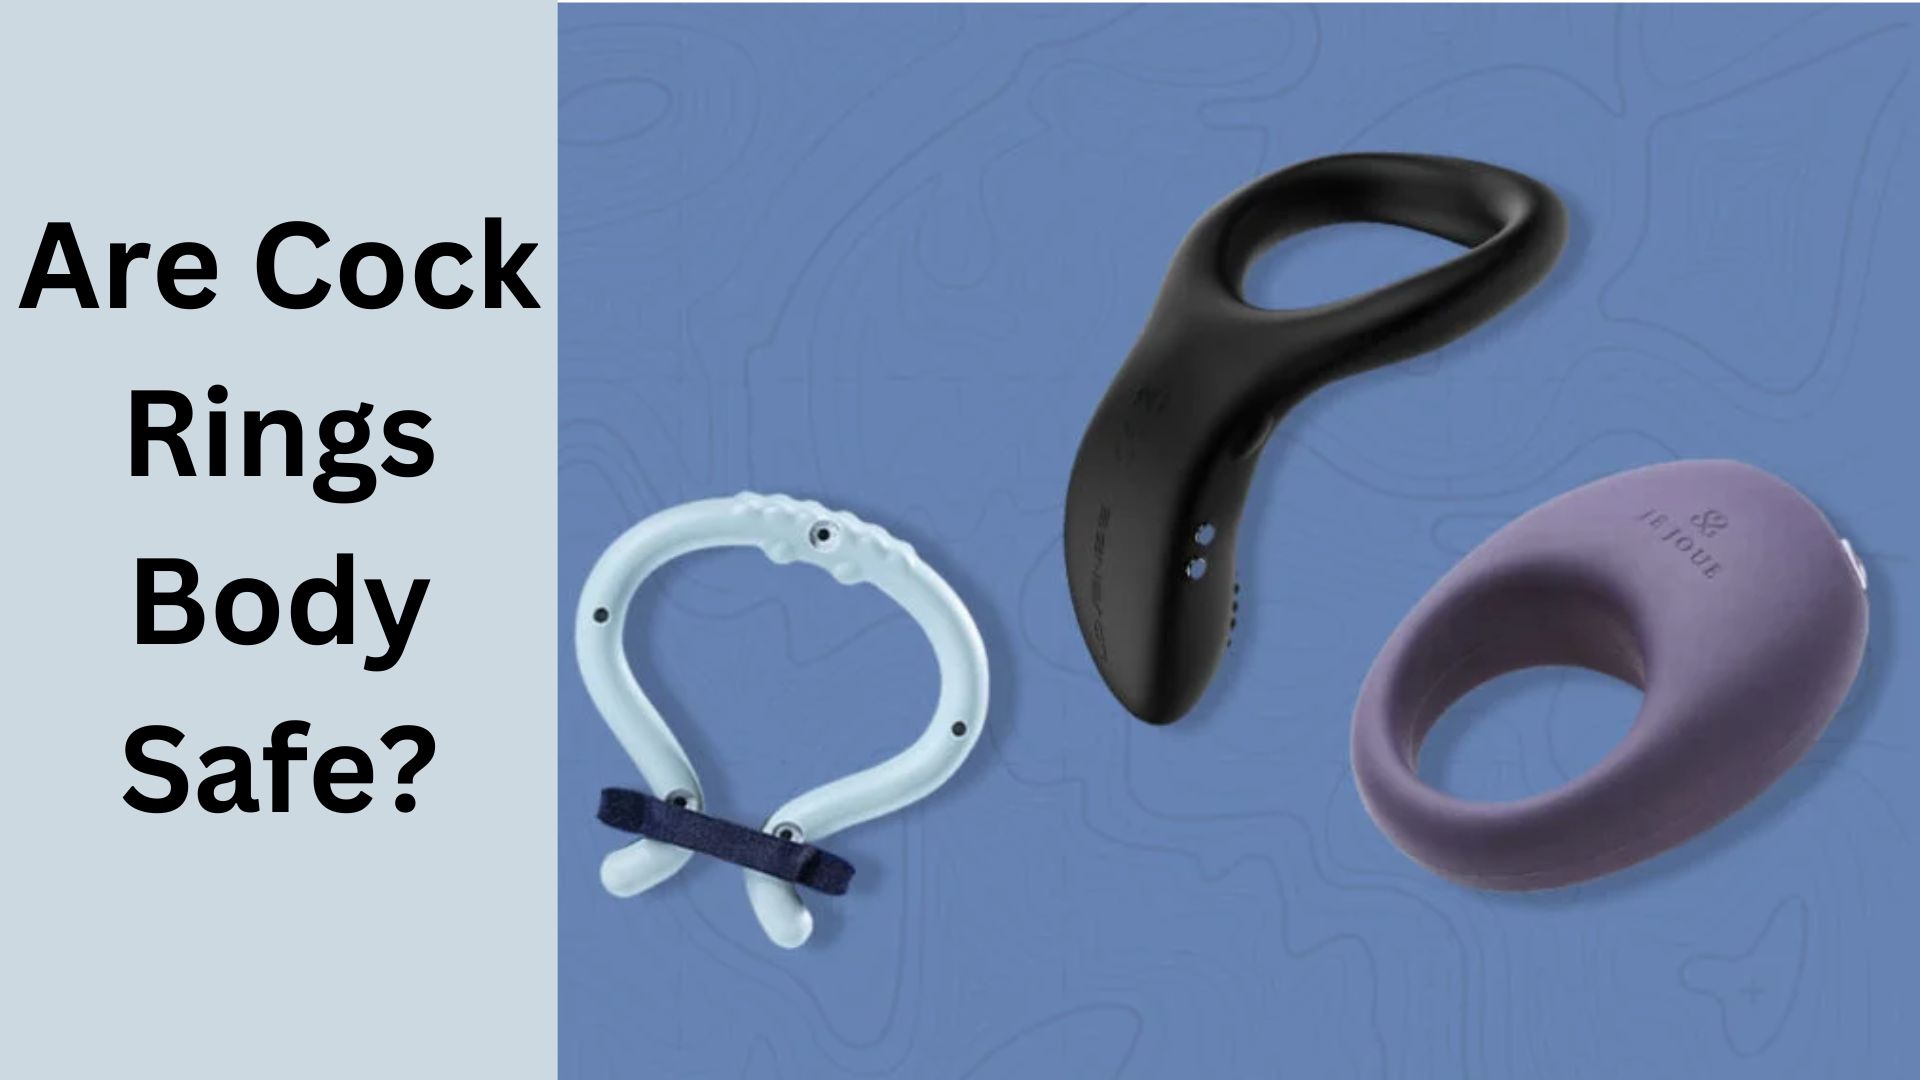 Are Cock Rings Body Safe